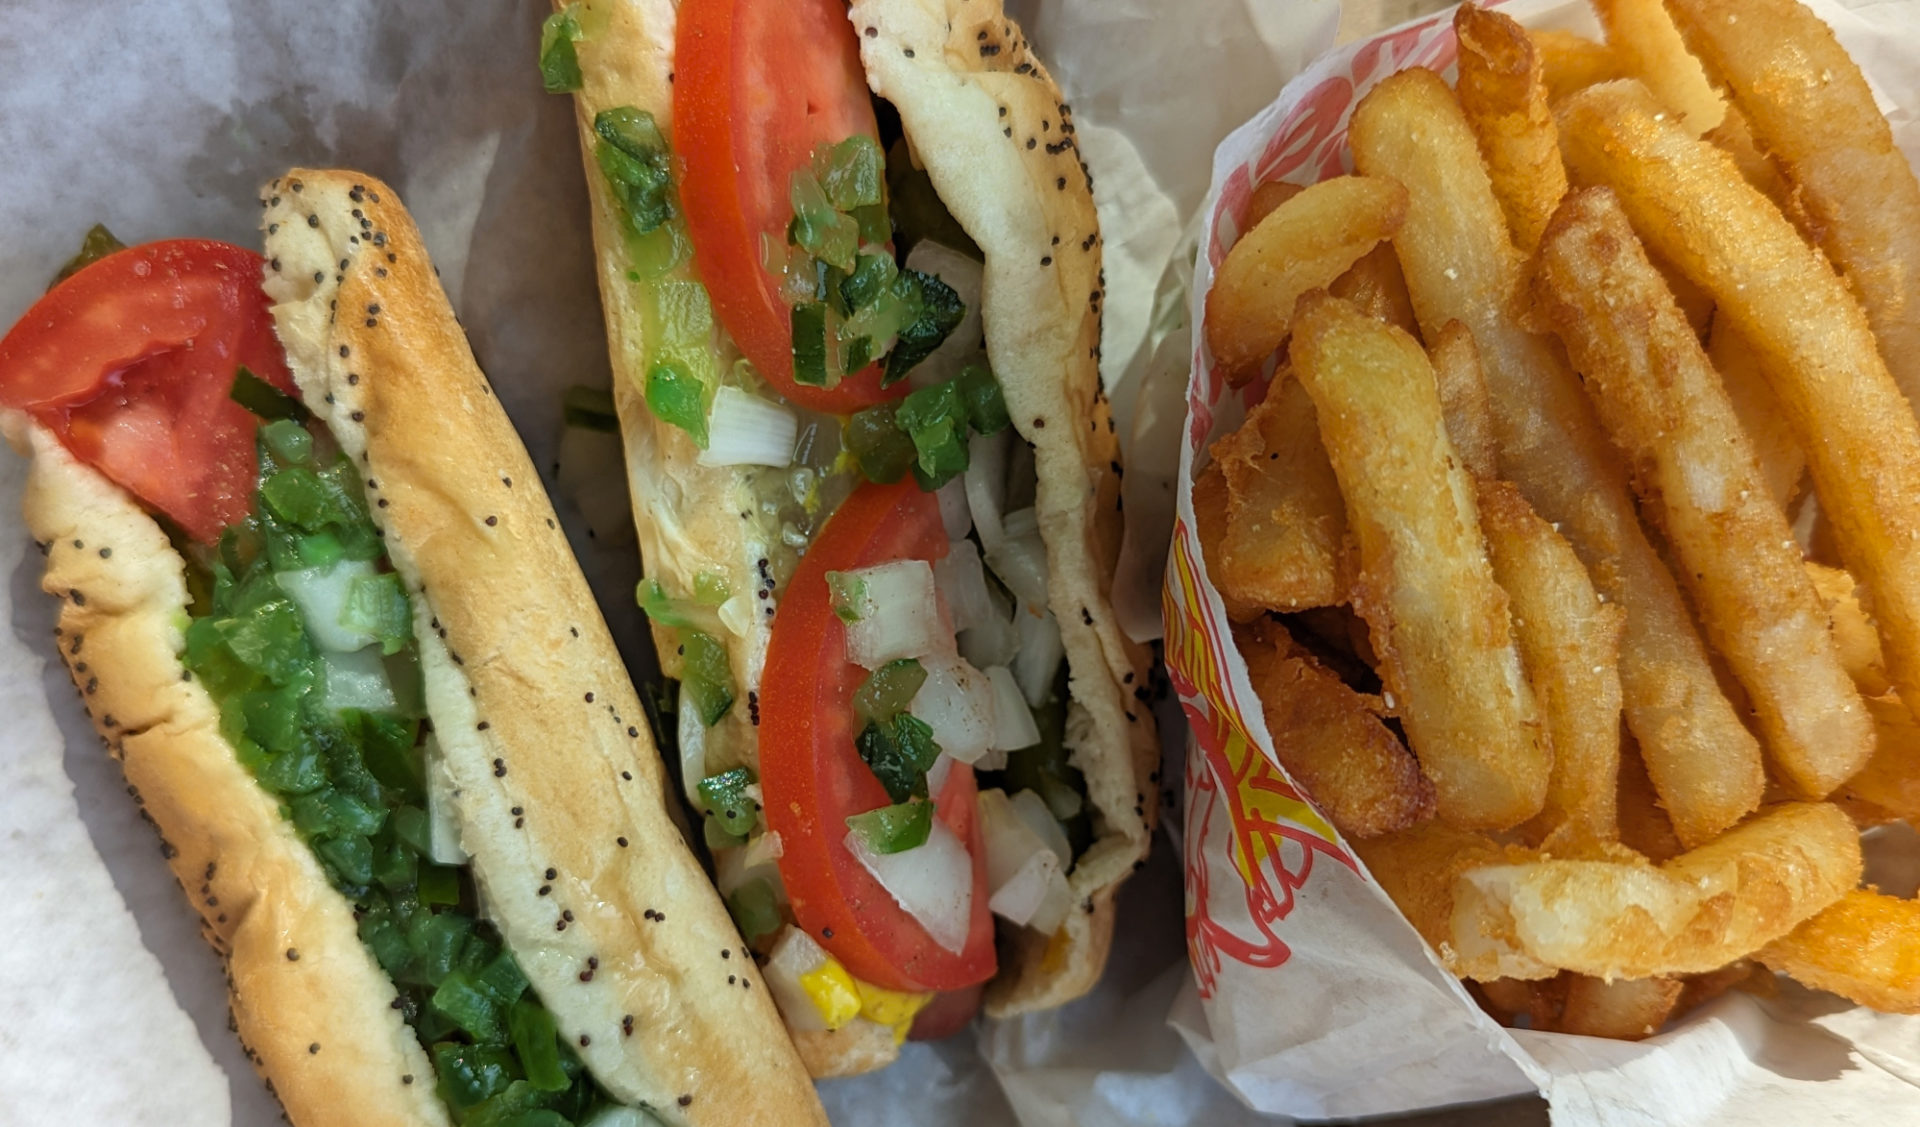 A cropped photo of two Chicago dogs from Windy City with a side of fries.